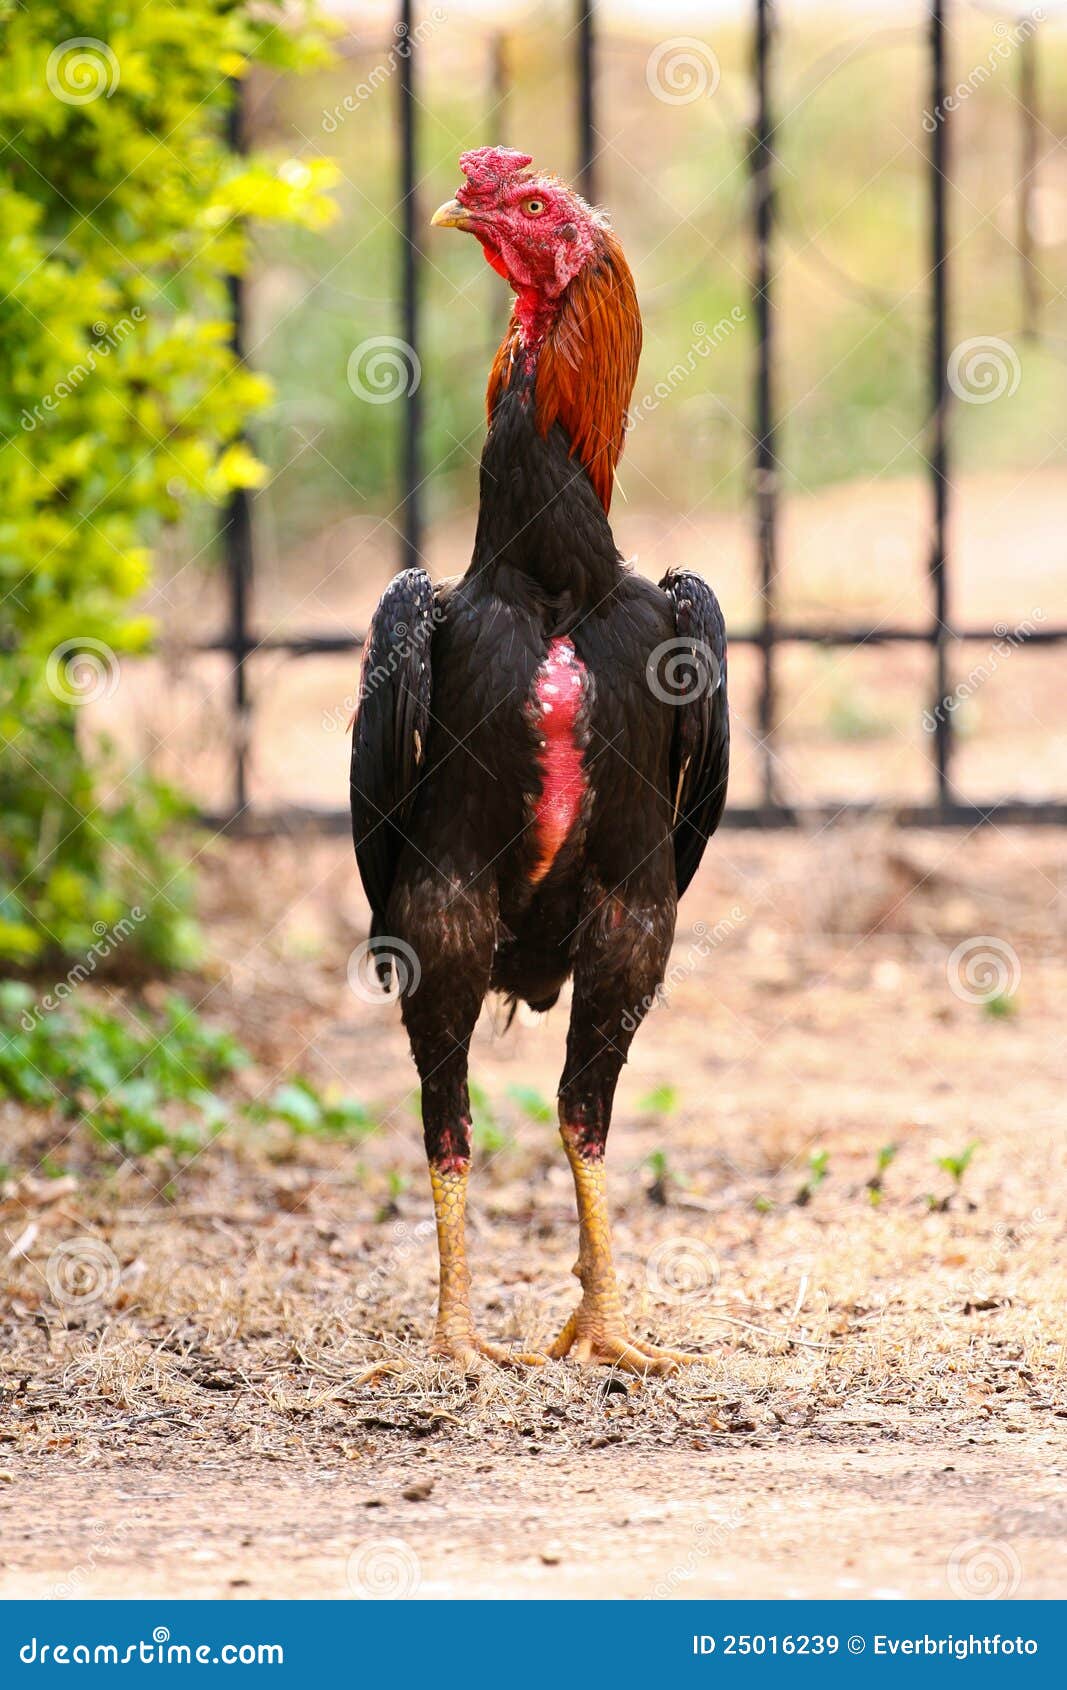 Photo Of A Cock 42